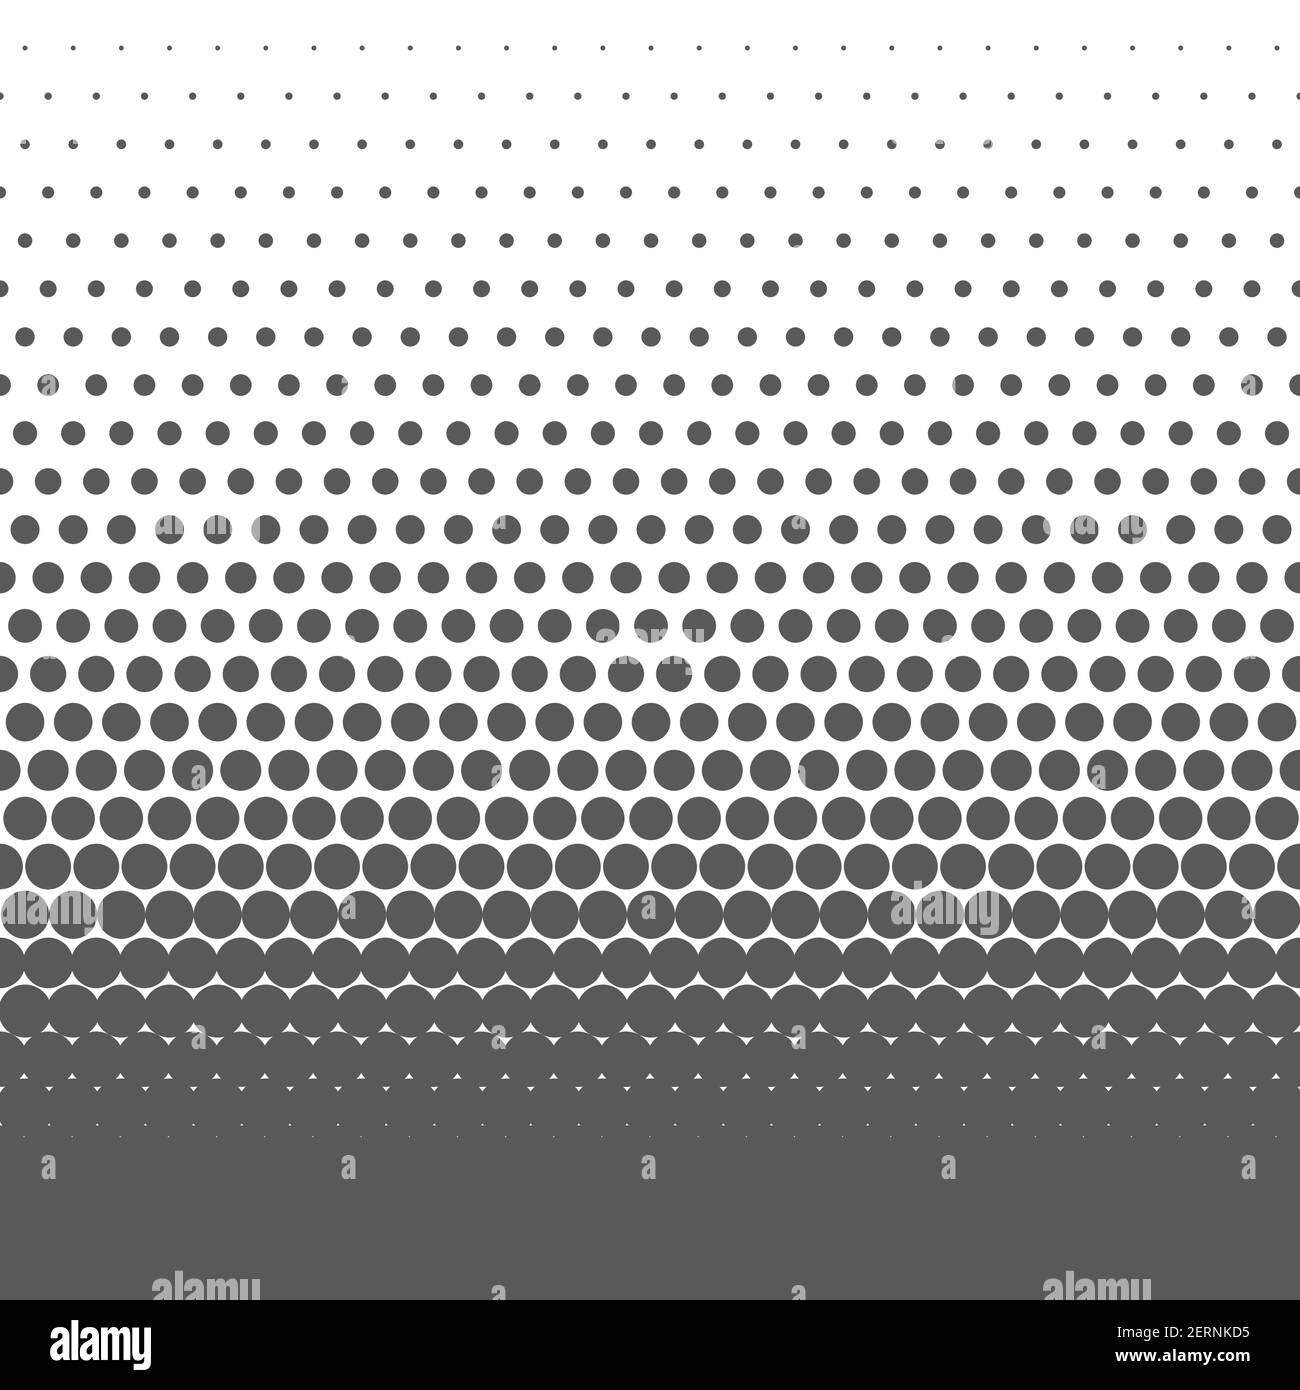 Abstract Gradient Dots Background. Points Backdrop. Black and White Distressed Texture. Vector illustration Stock Vector